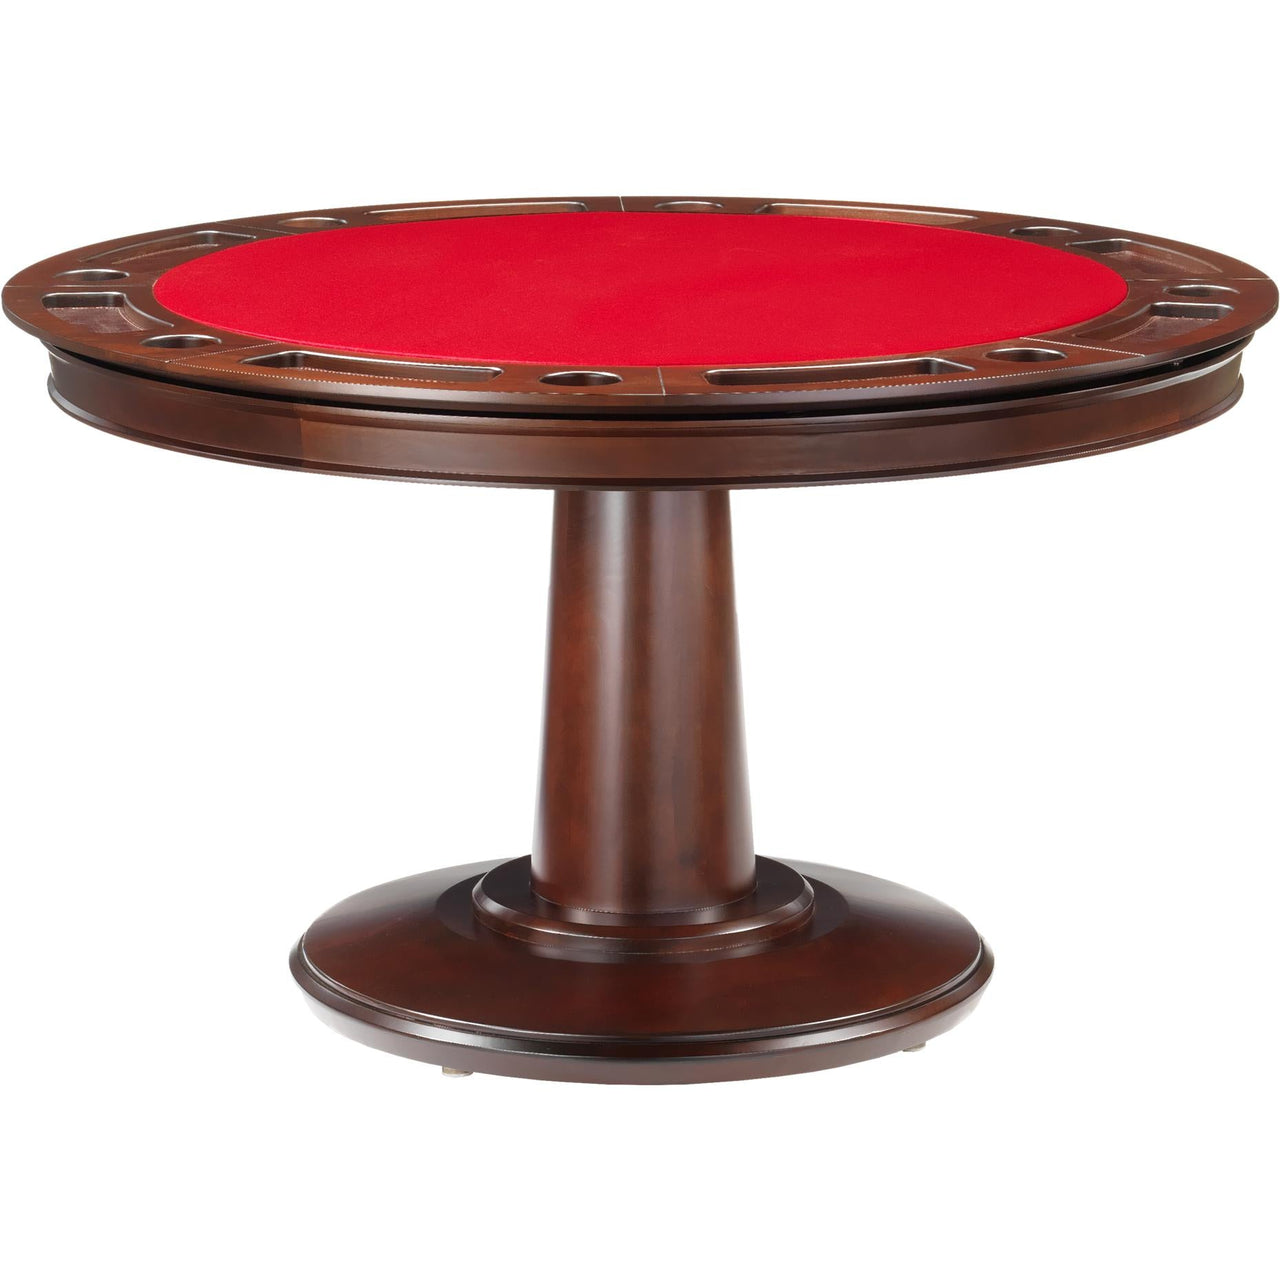 Convertible Poker & Dining Table Liberty by Darafeev-AMERICANA-POKER-TABLES